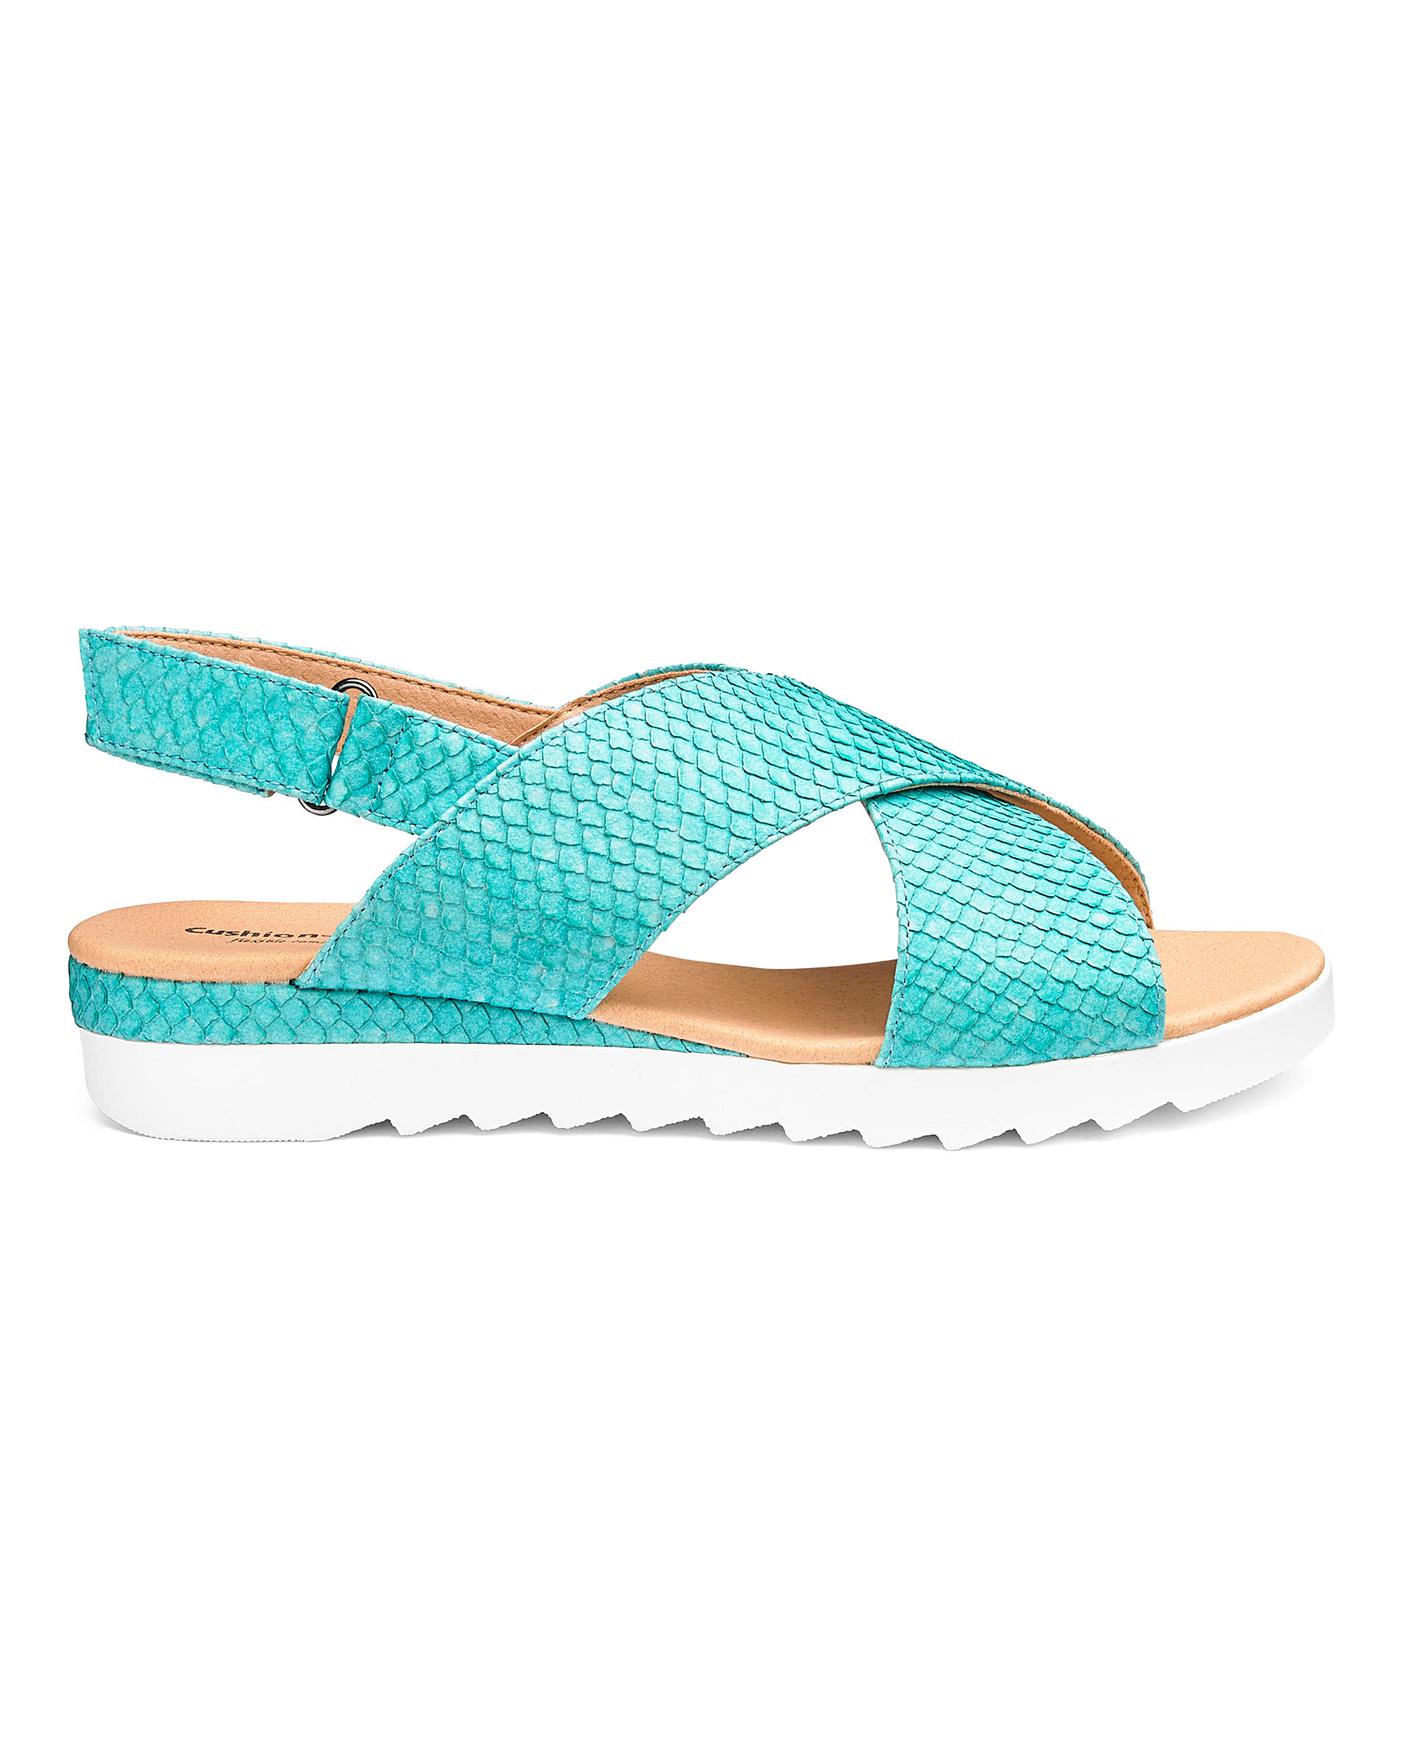 Cushion Walk Crossover Sandals E Fit 